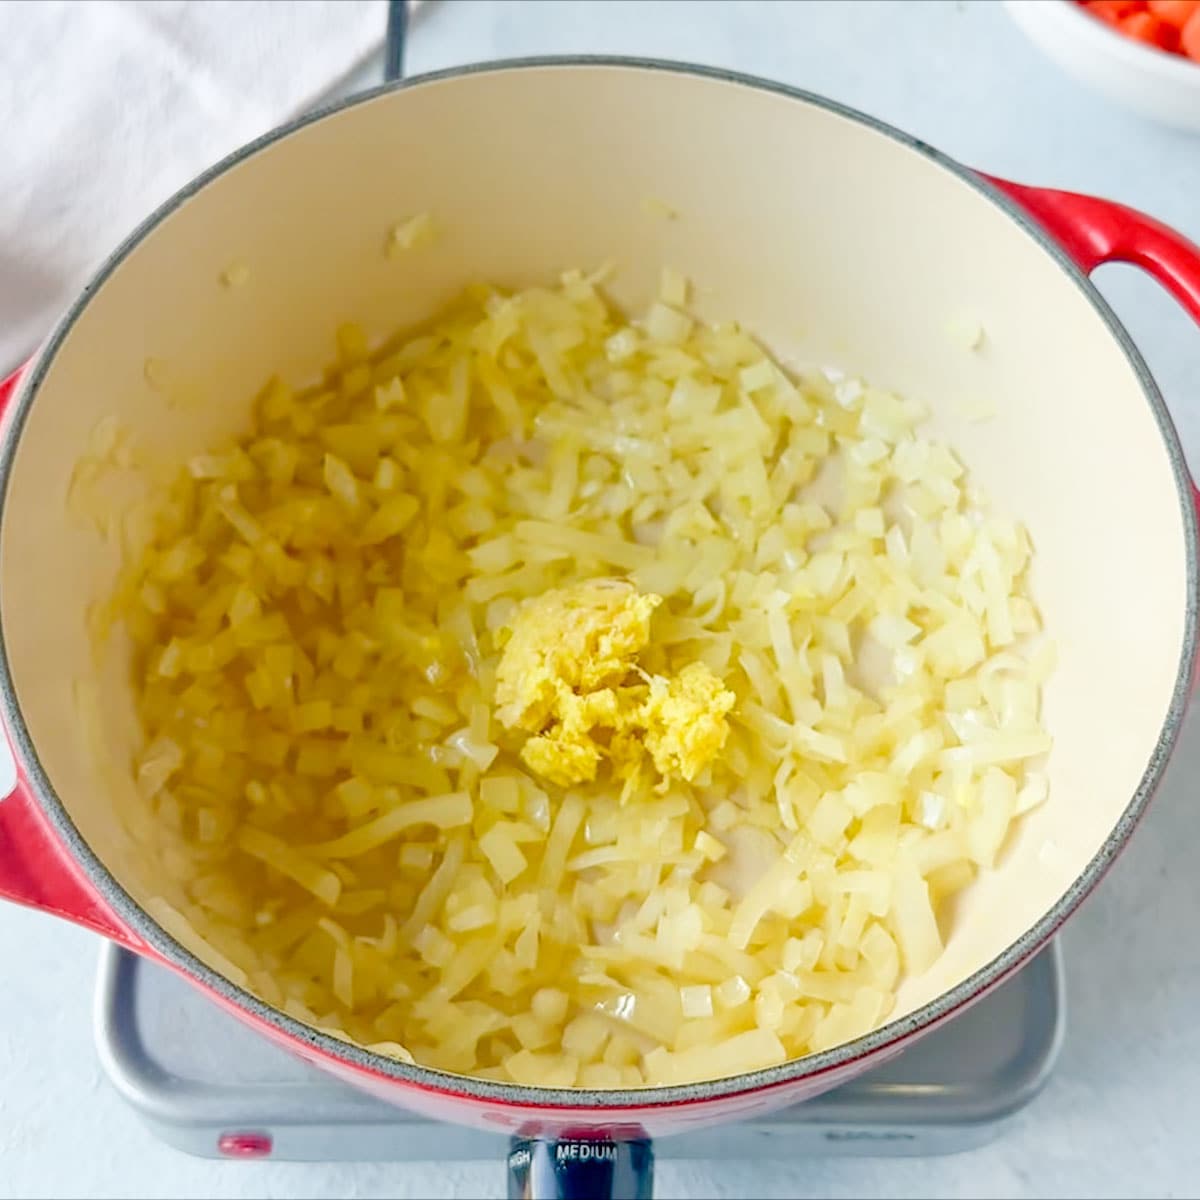 Adding the ginger in the pan filled with yellow onions